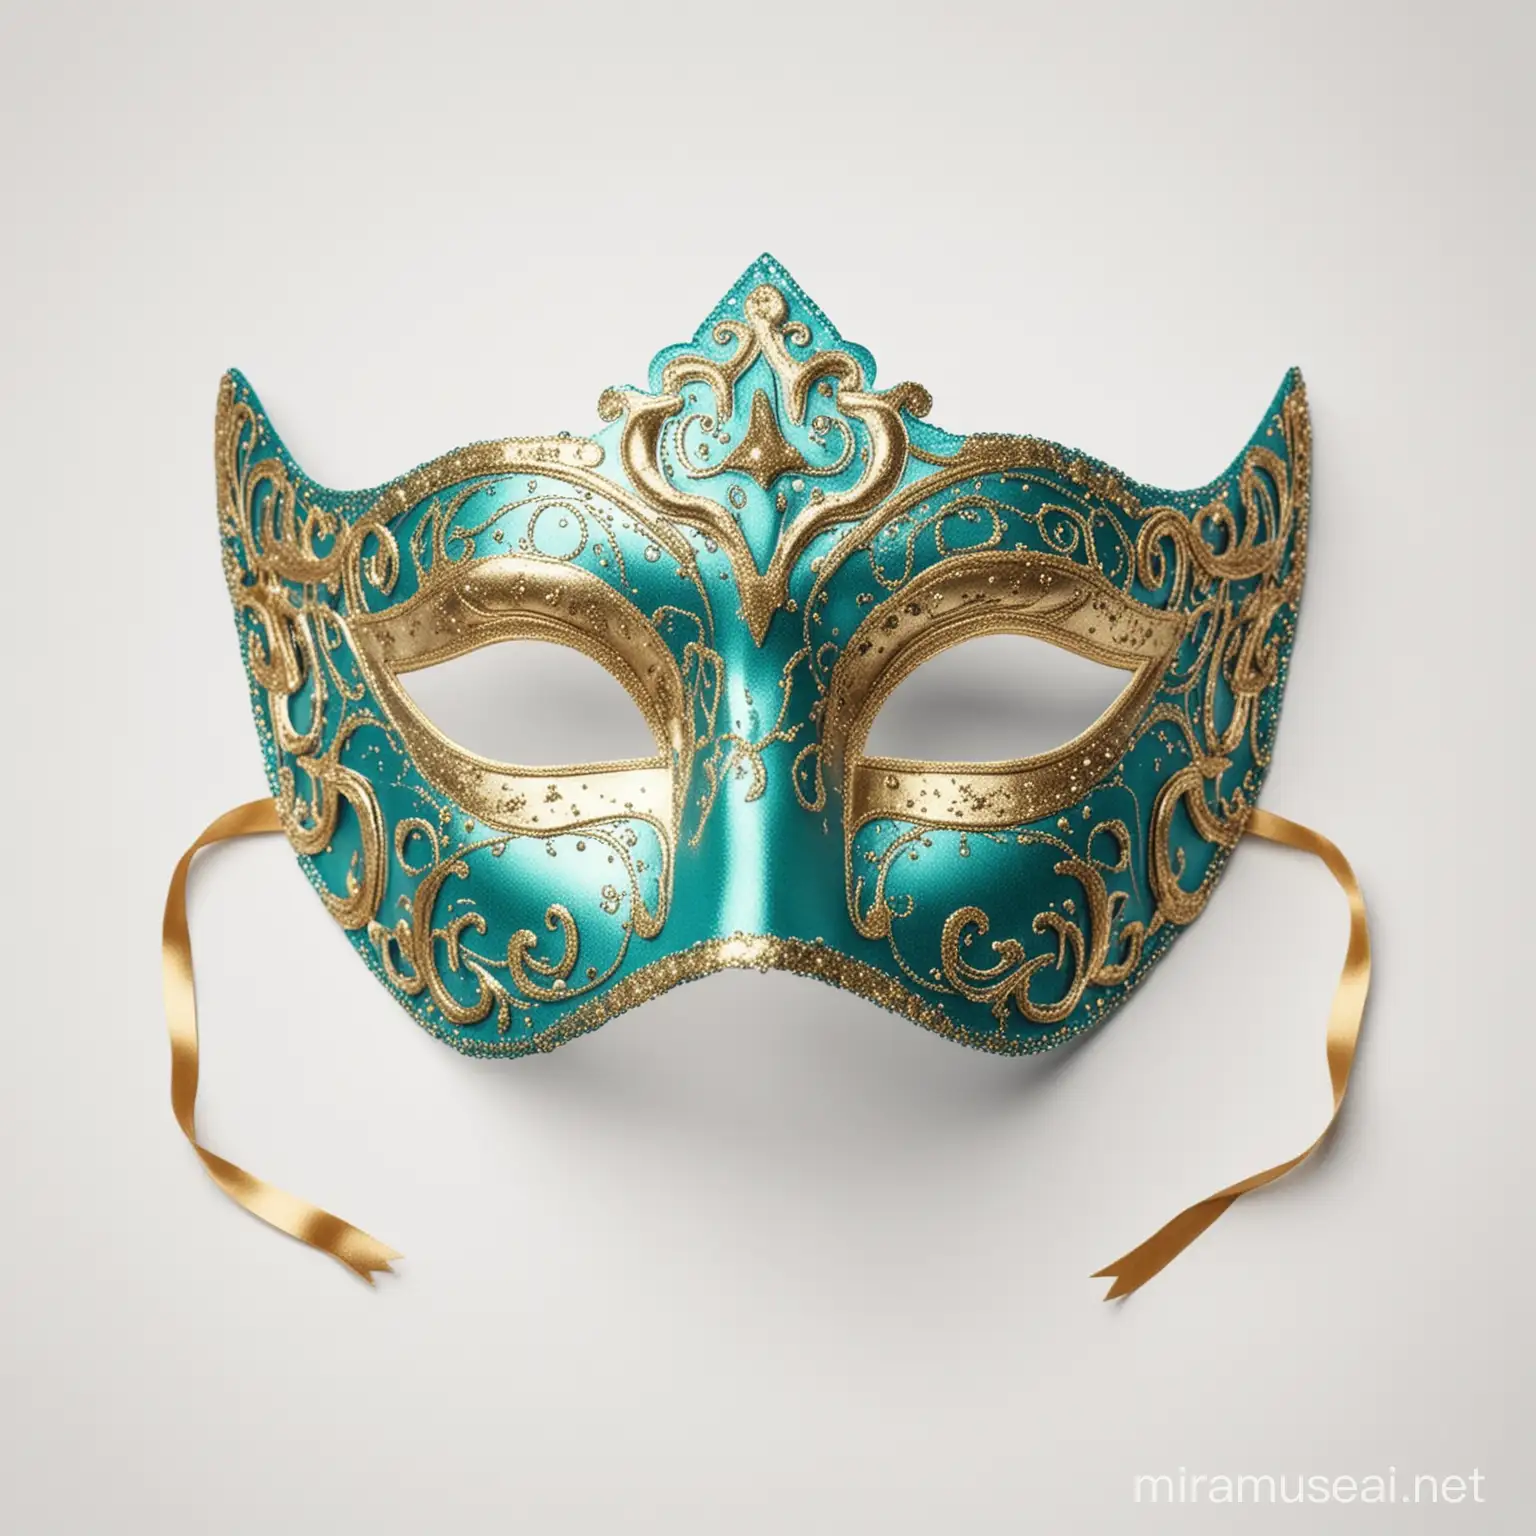 shimmering carnival mask in teal and gold on a white background